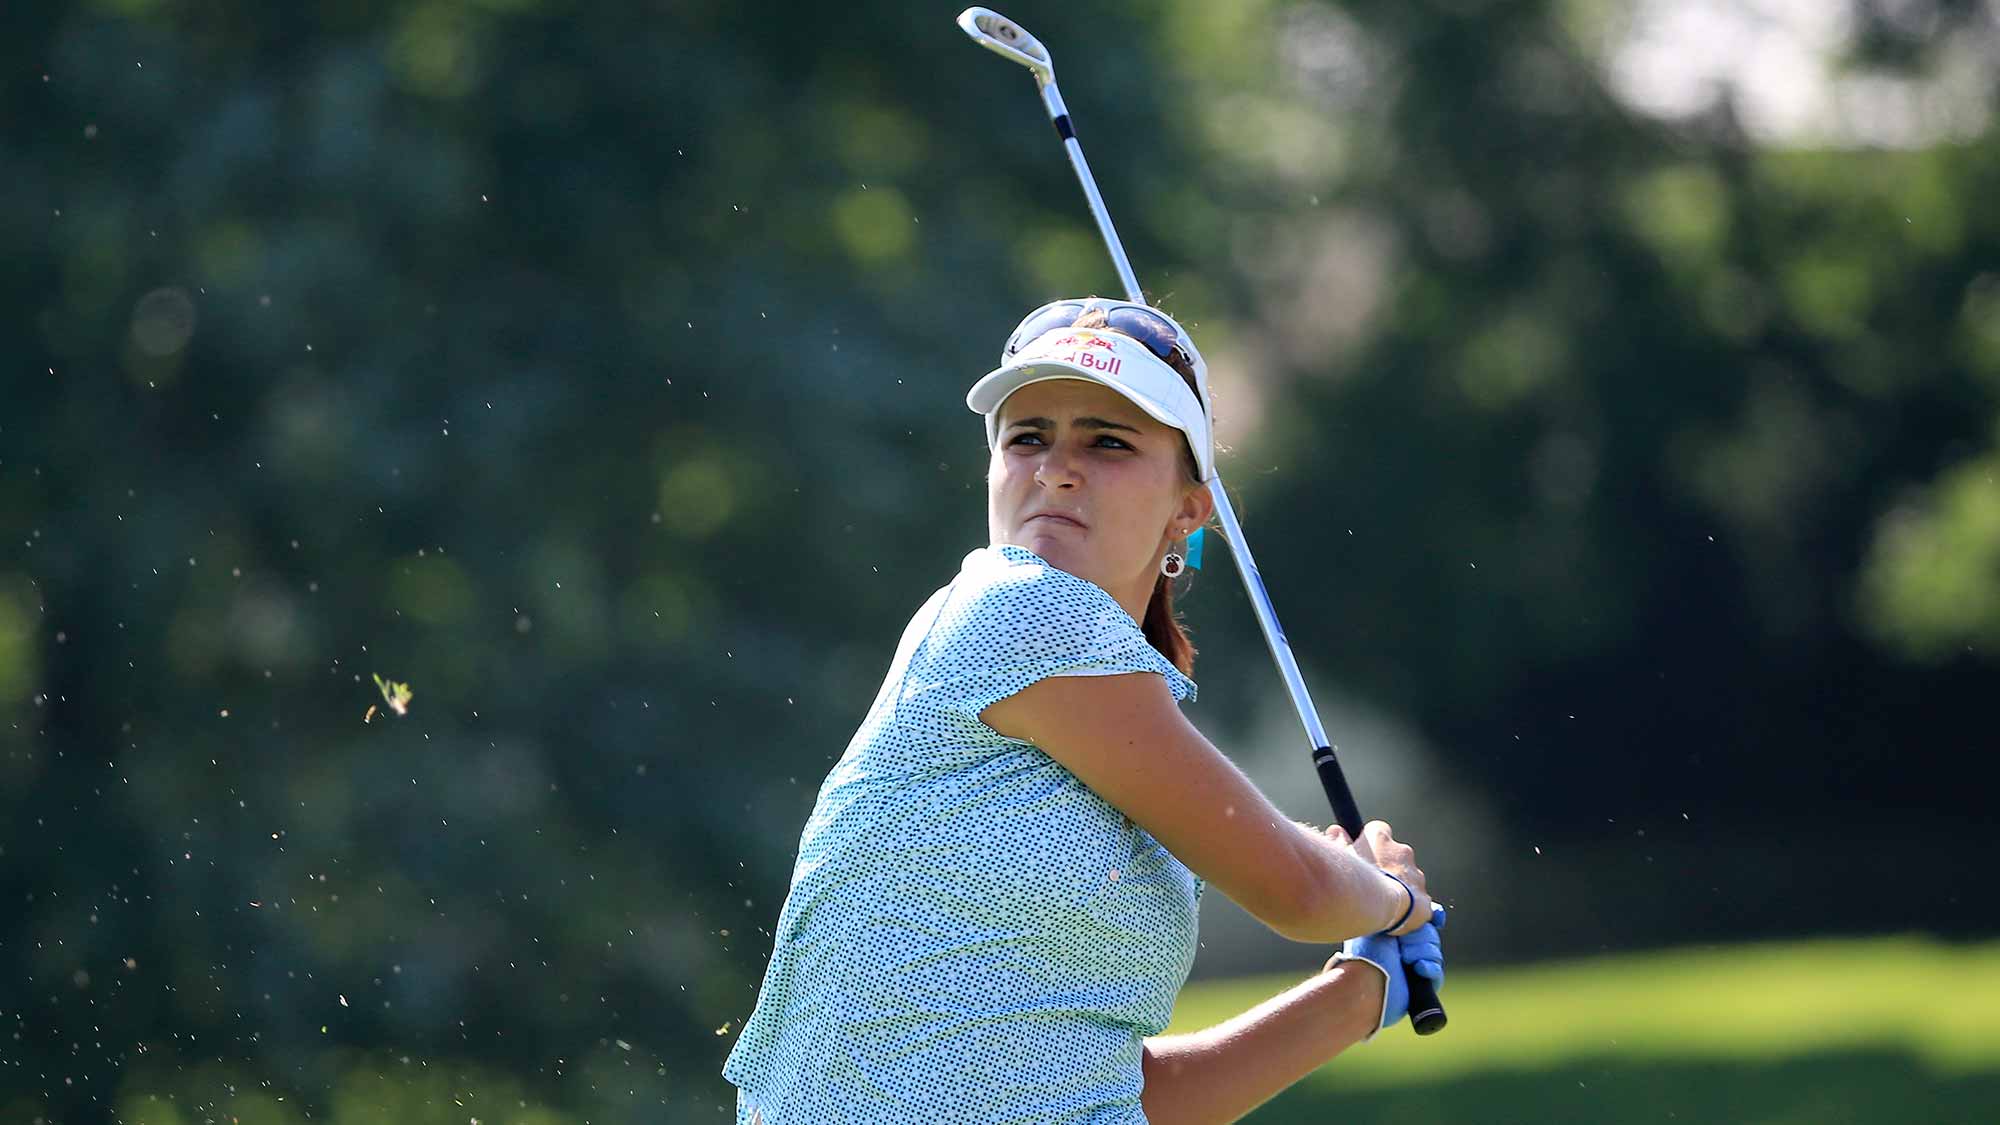 Lexi Thompson of the United States plays a shot on the sixth hole during the second round of the U.S. Women's Open at Lancaster Country Club